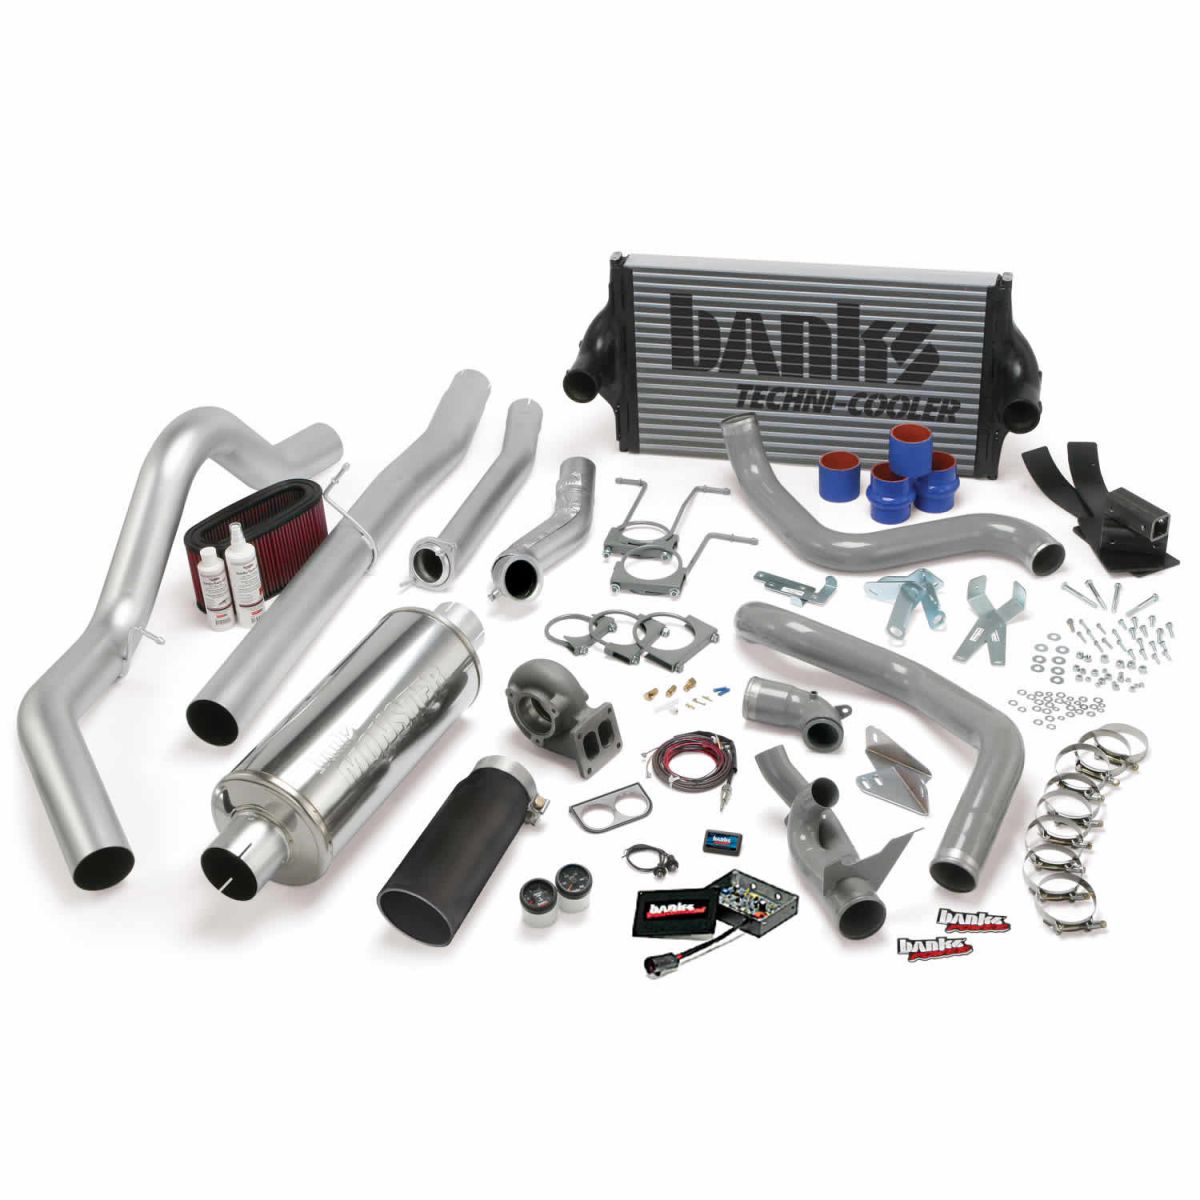 Banks Power - Banks Power PowerPack Bundle Complete Power System W/OttoMind Engine Calibration Module Black Tail Pipe 94-97 Ford 7.3L CCLB Automatic Transmission